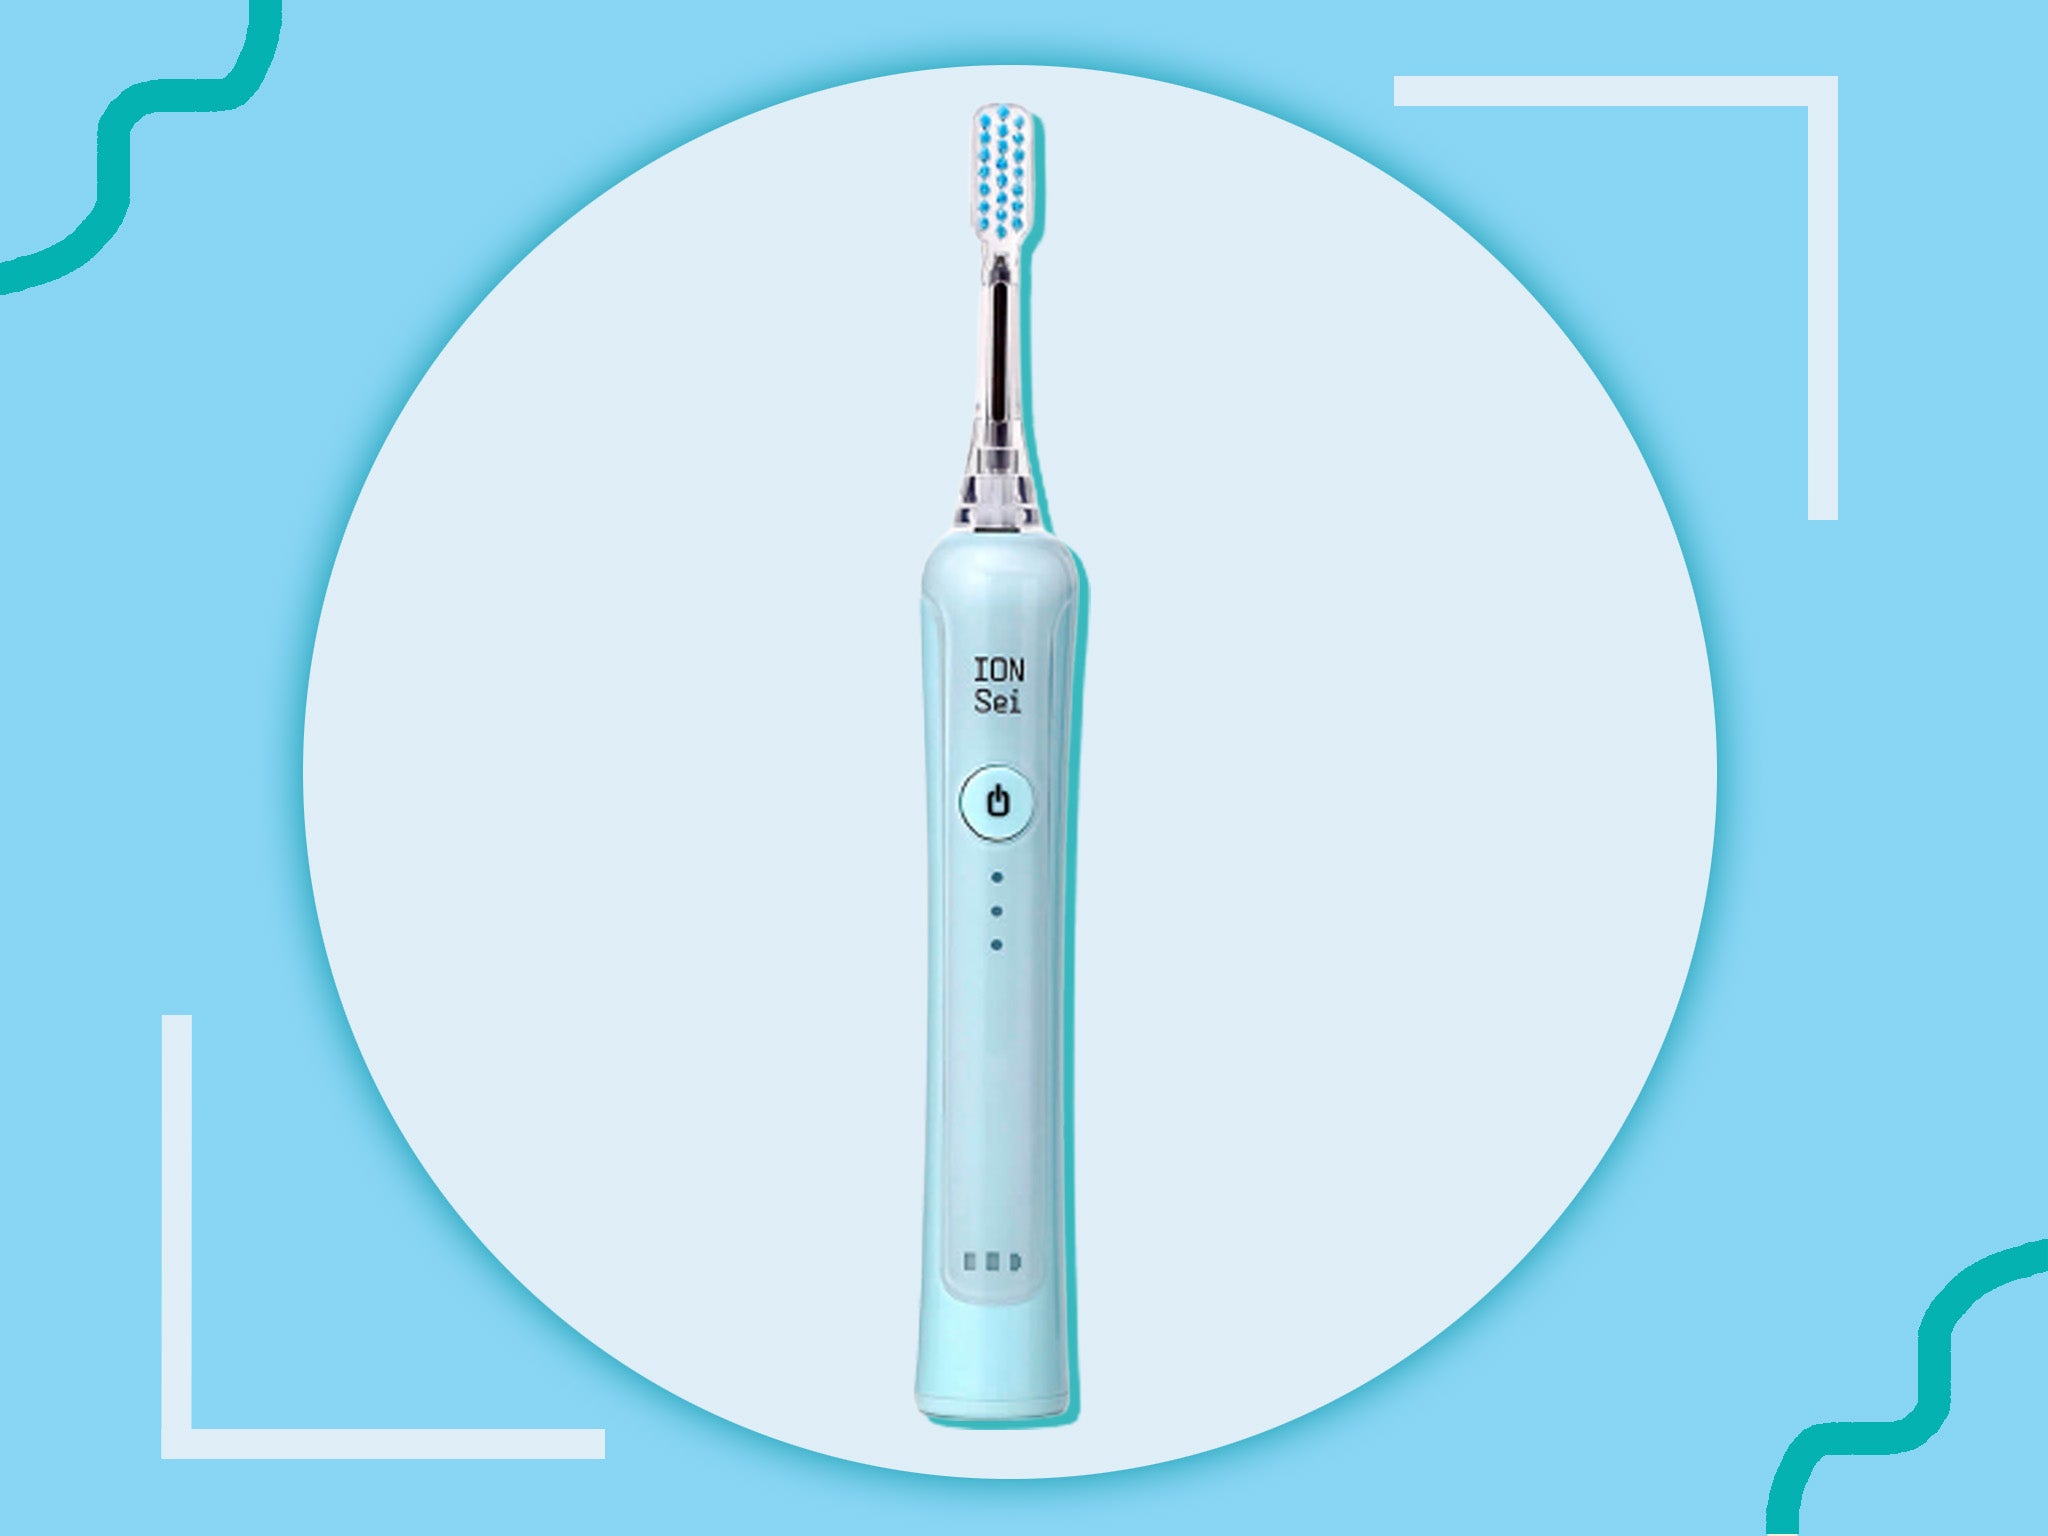 The brush uses negative ions to attract plaque, while also suppressing future build-ups